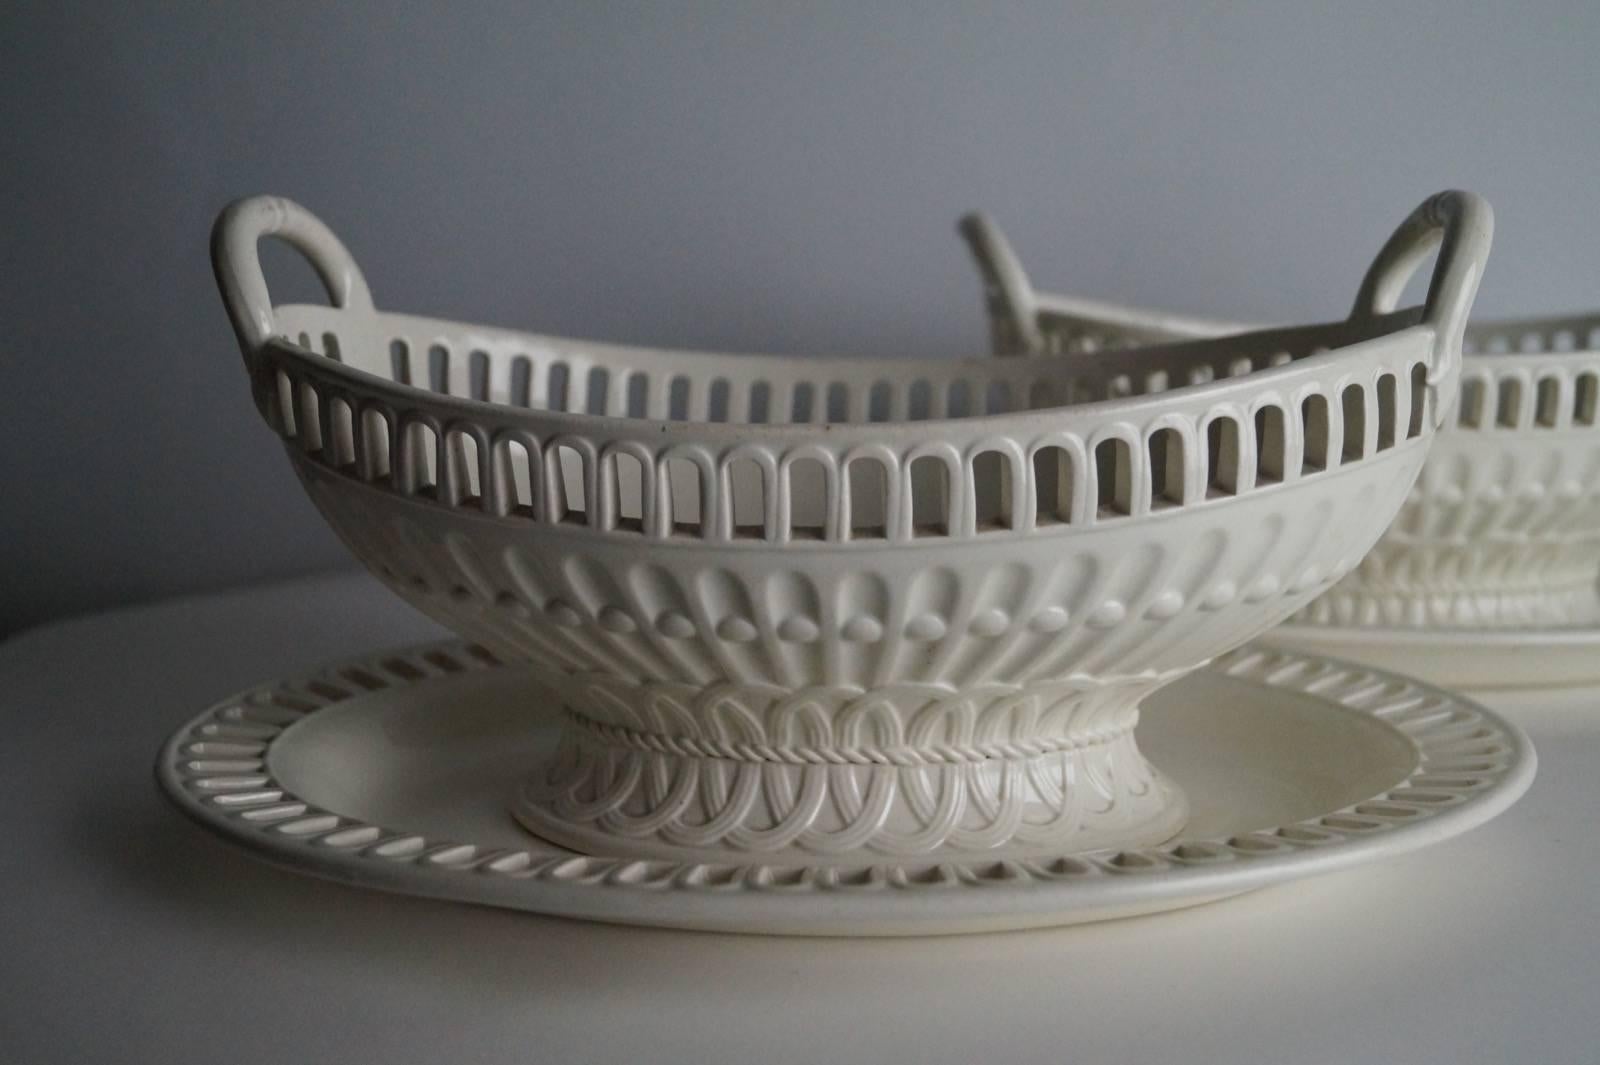 Two antique Wedgwood creamware open work baskets with under plates,
circa 1850 and in good condition.
Measures:
Four items (two baskets, two under plates):
Basket: 16.5 cm x 26.5 cm.
Under plate: 22.5 cm x 30.5 cm.